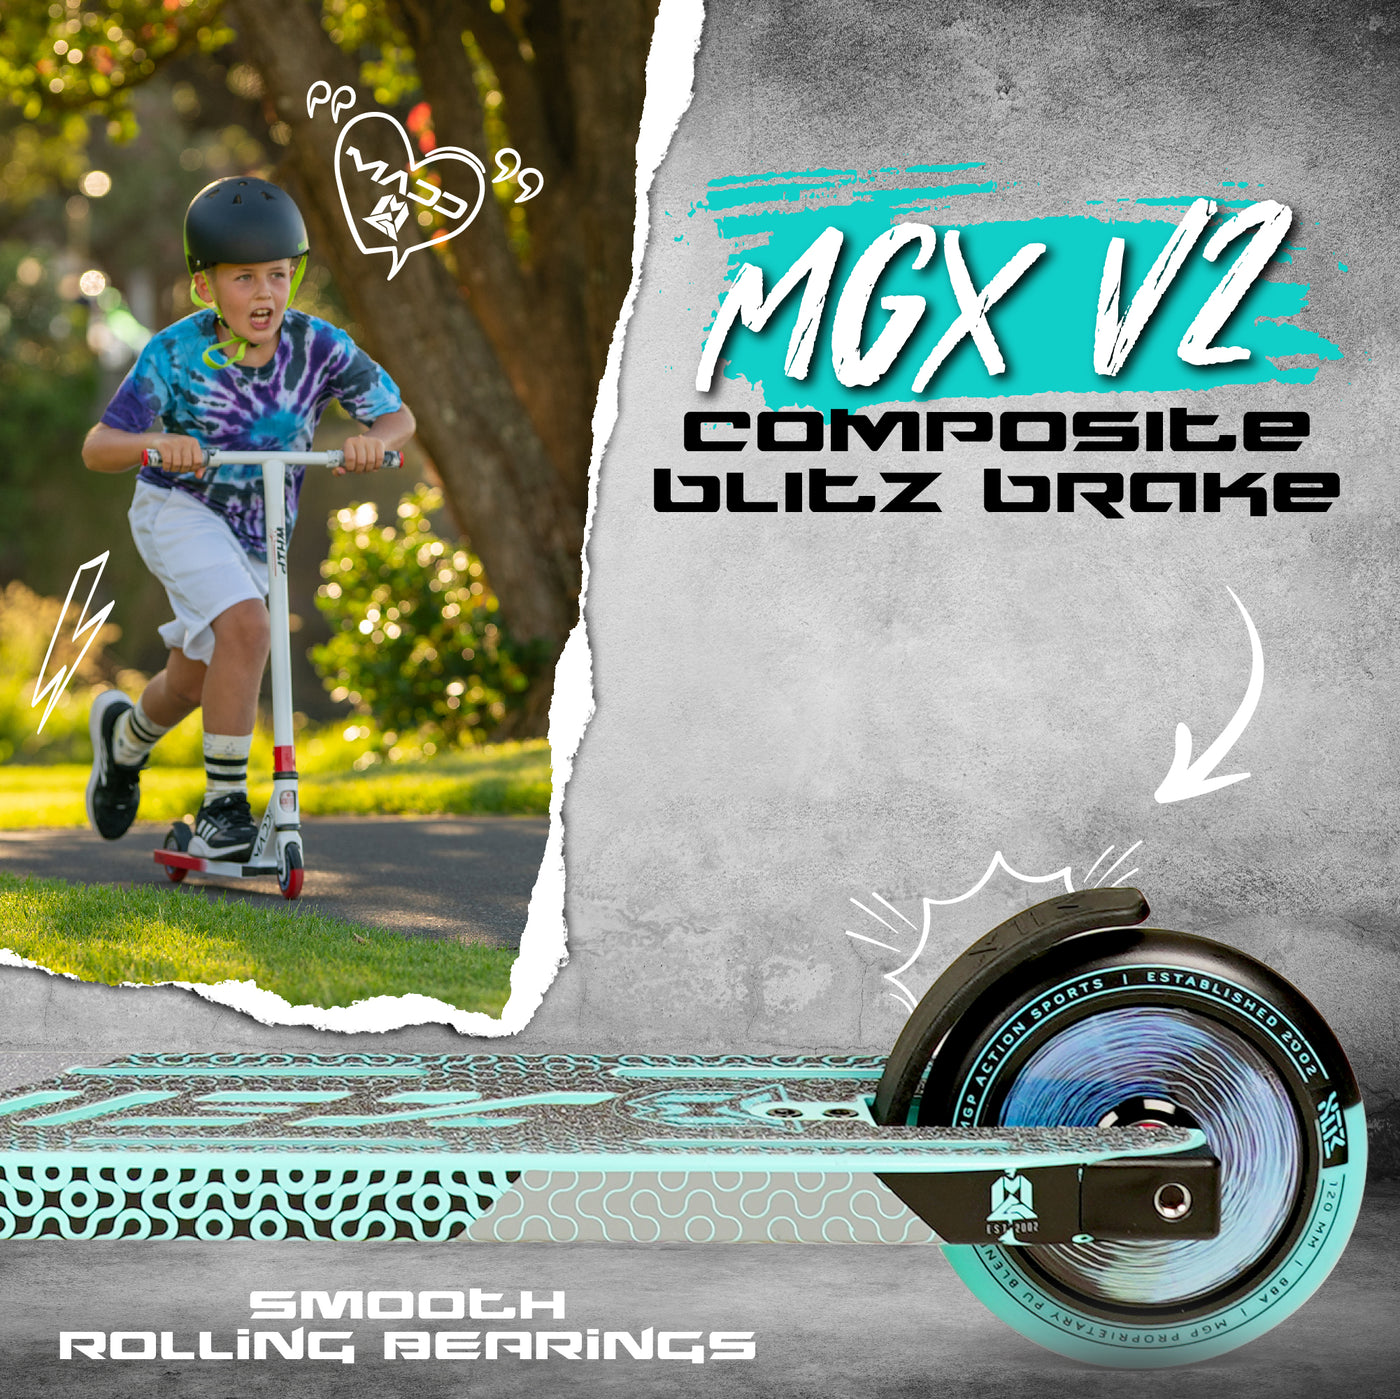 MGX P2 Pro Teal Black Taze Stunt Scooter Lightest Best Madd Gear MGP Hollow Cores Smooth Rolling Bearings Brake